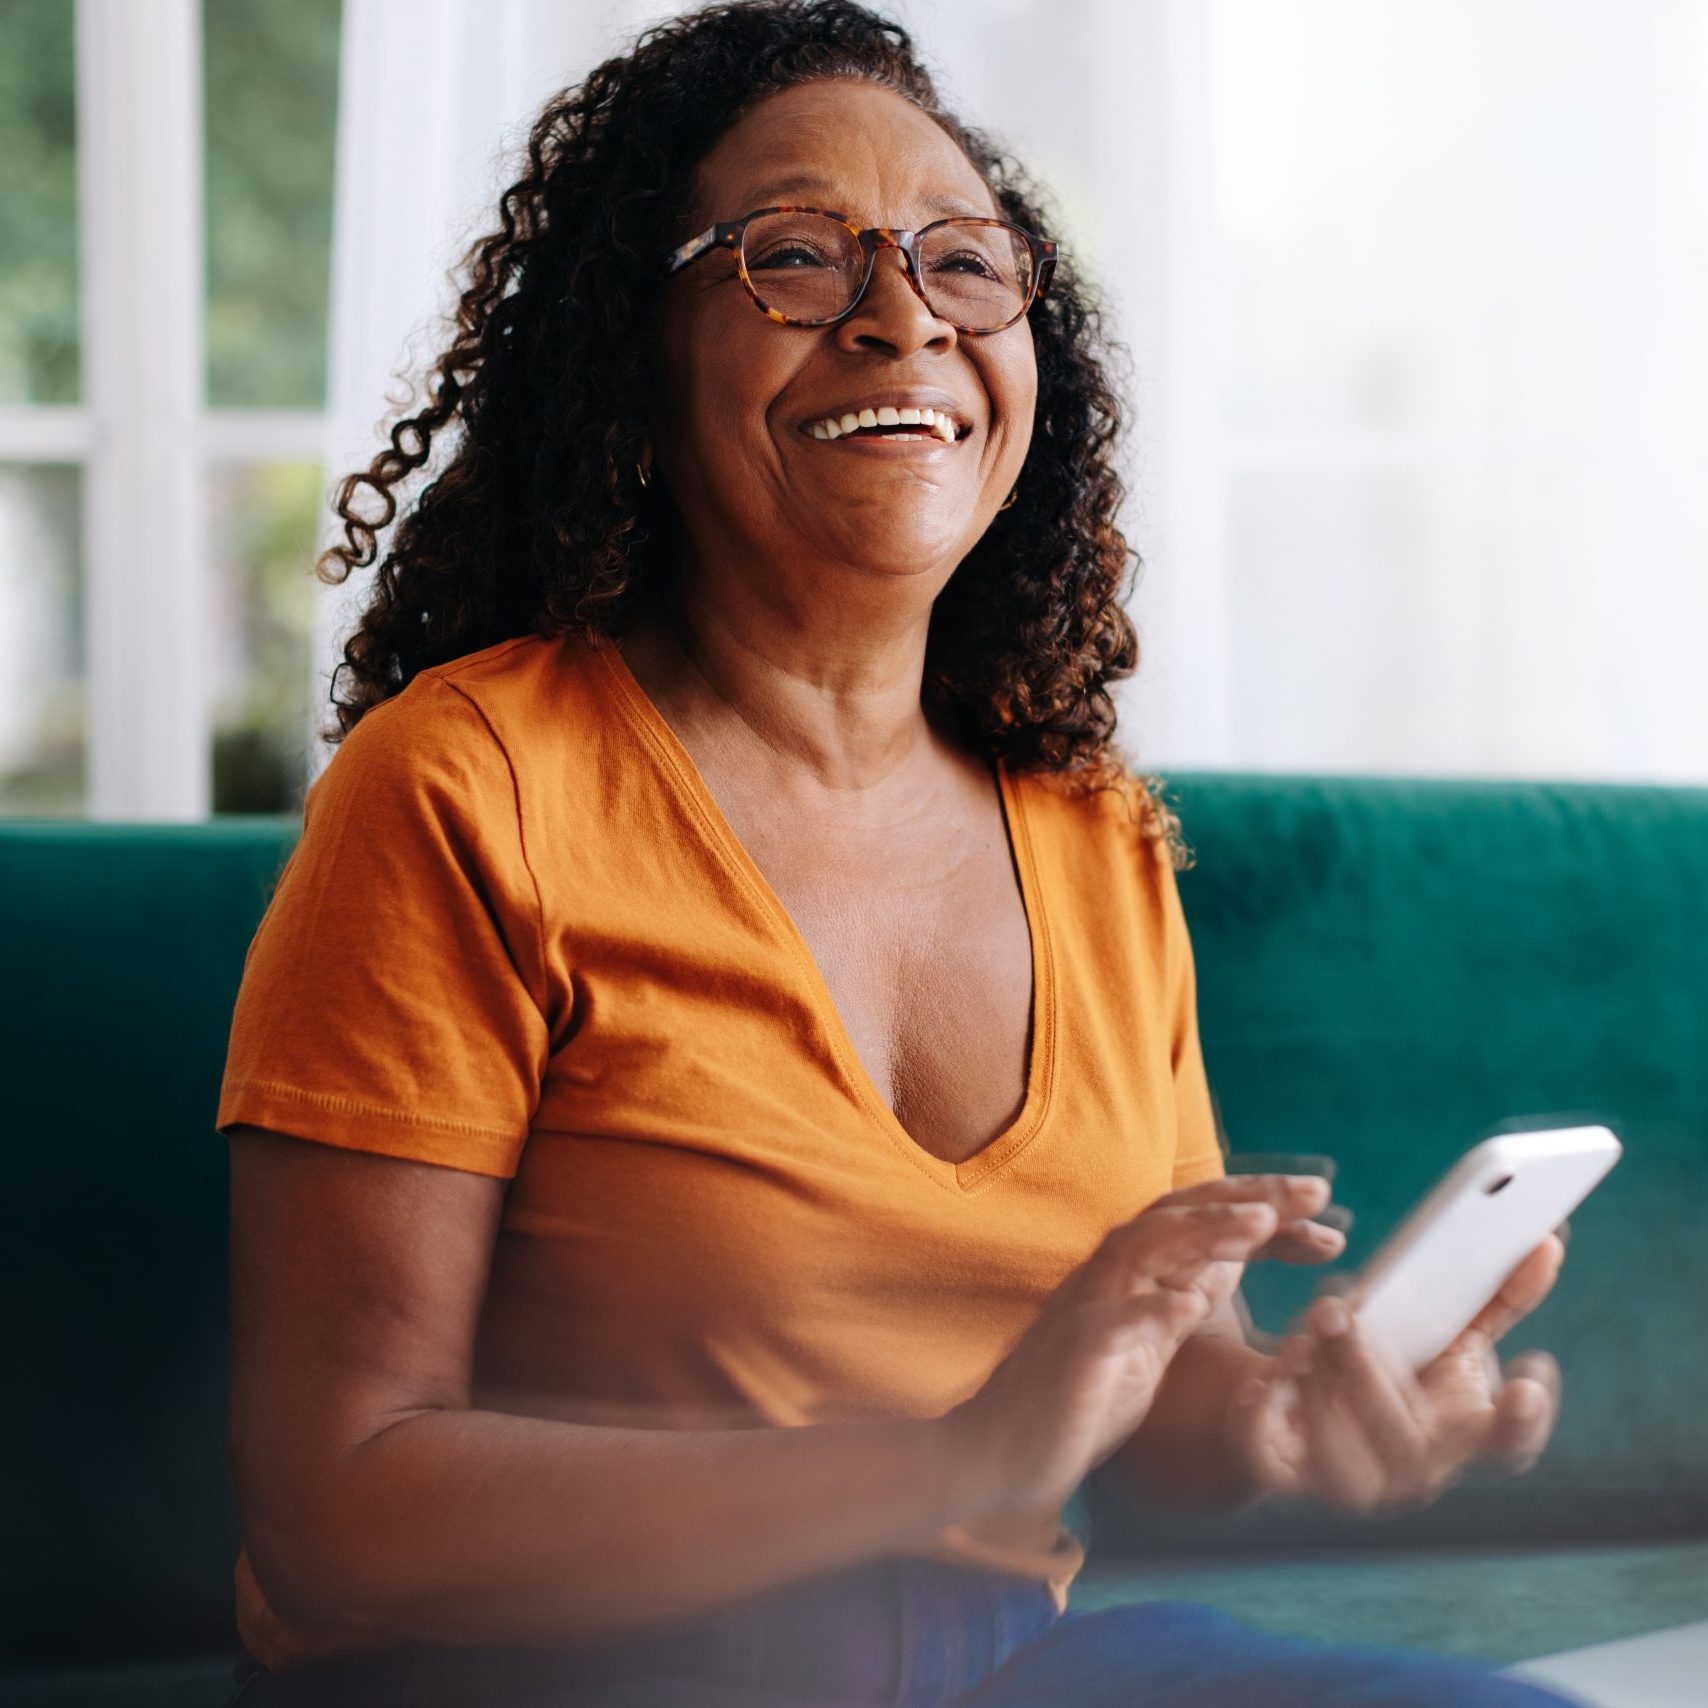 Retired woman using her smartphone to stay connected with her loved ones. Senior woman using mobile technology to make phone calls, send text messages, access social media, and browse the internet.